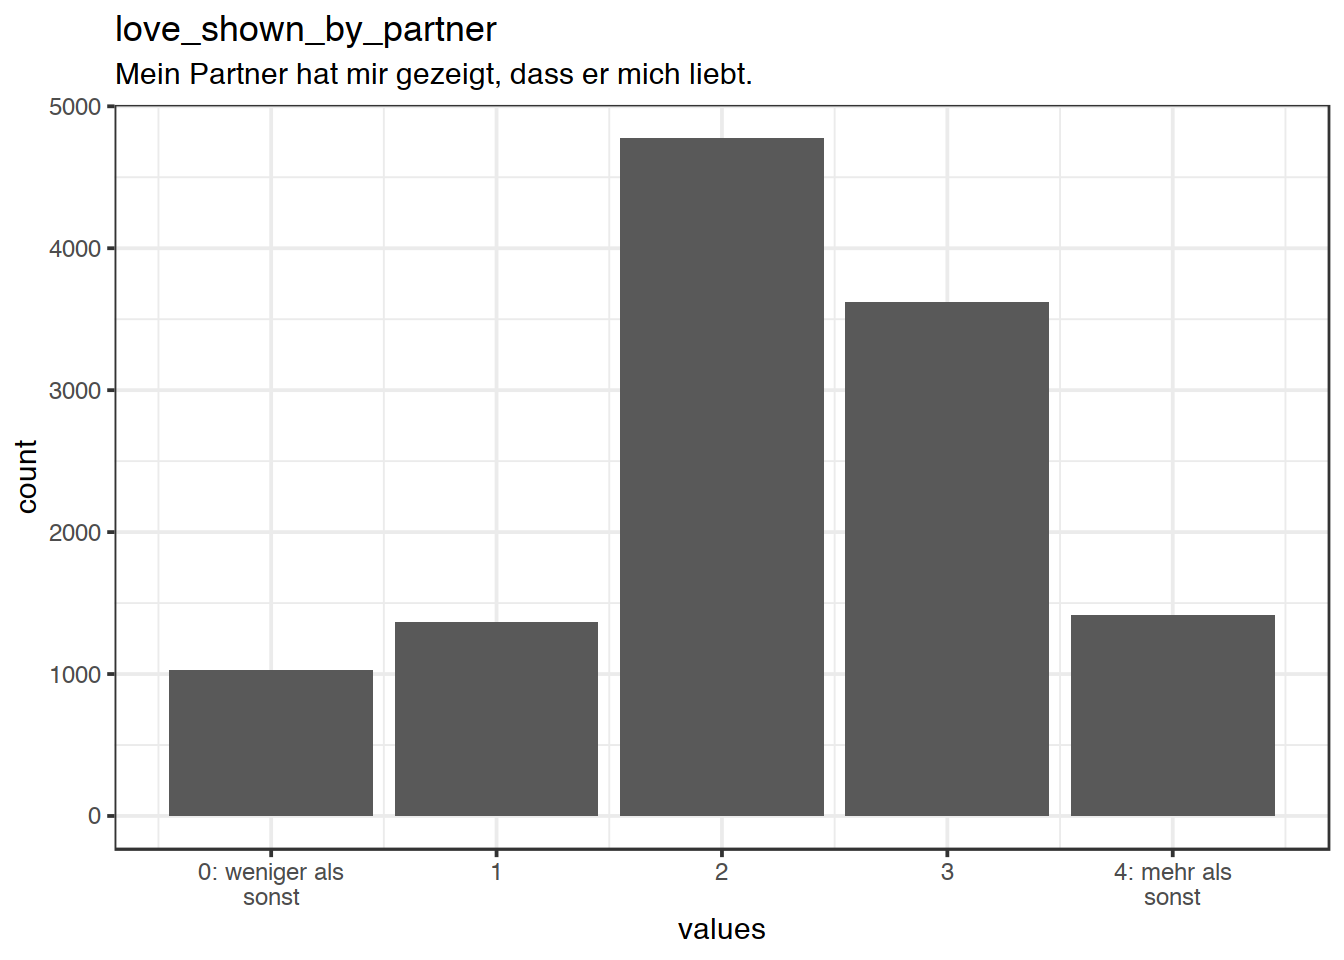 Distribution of values for love_shown_by_partner